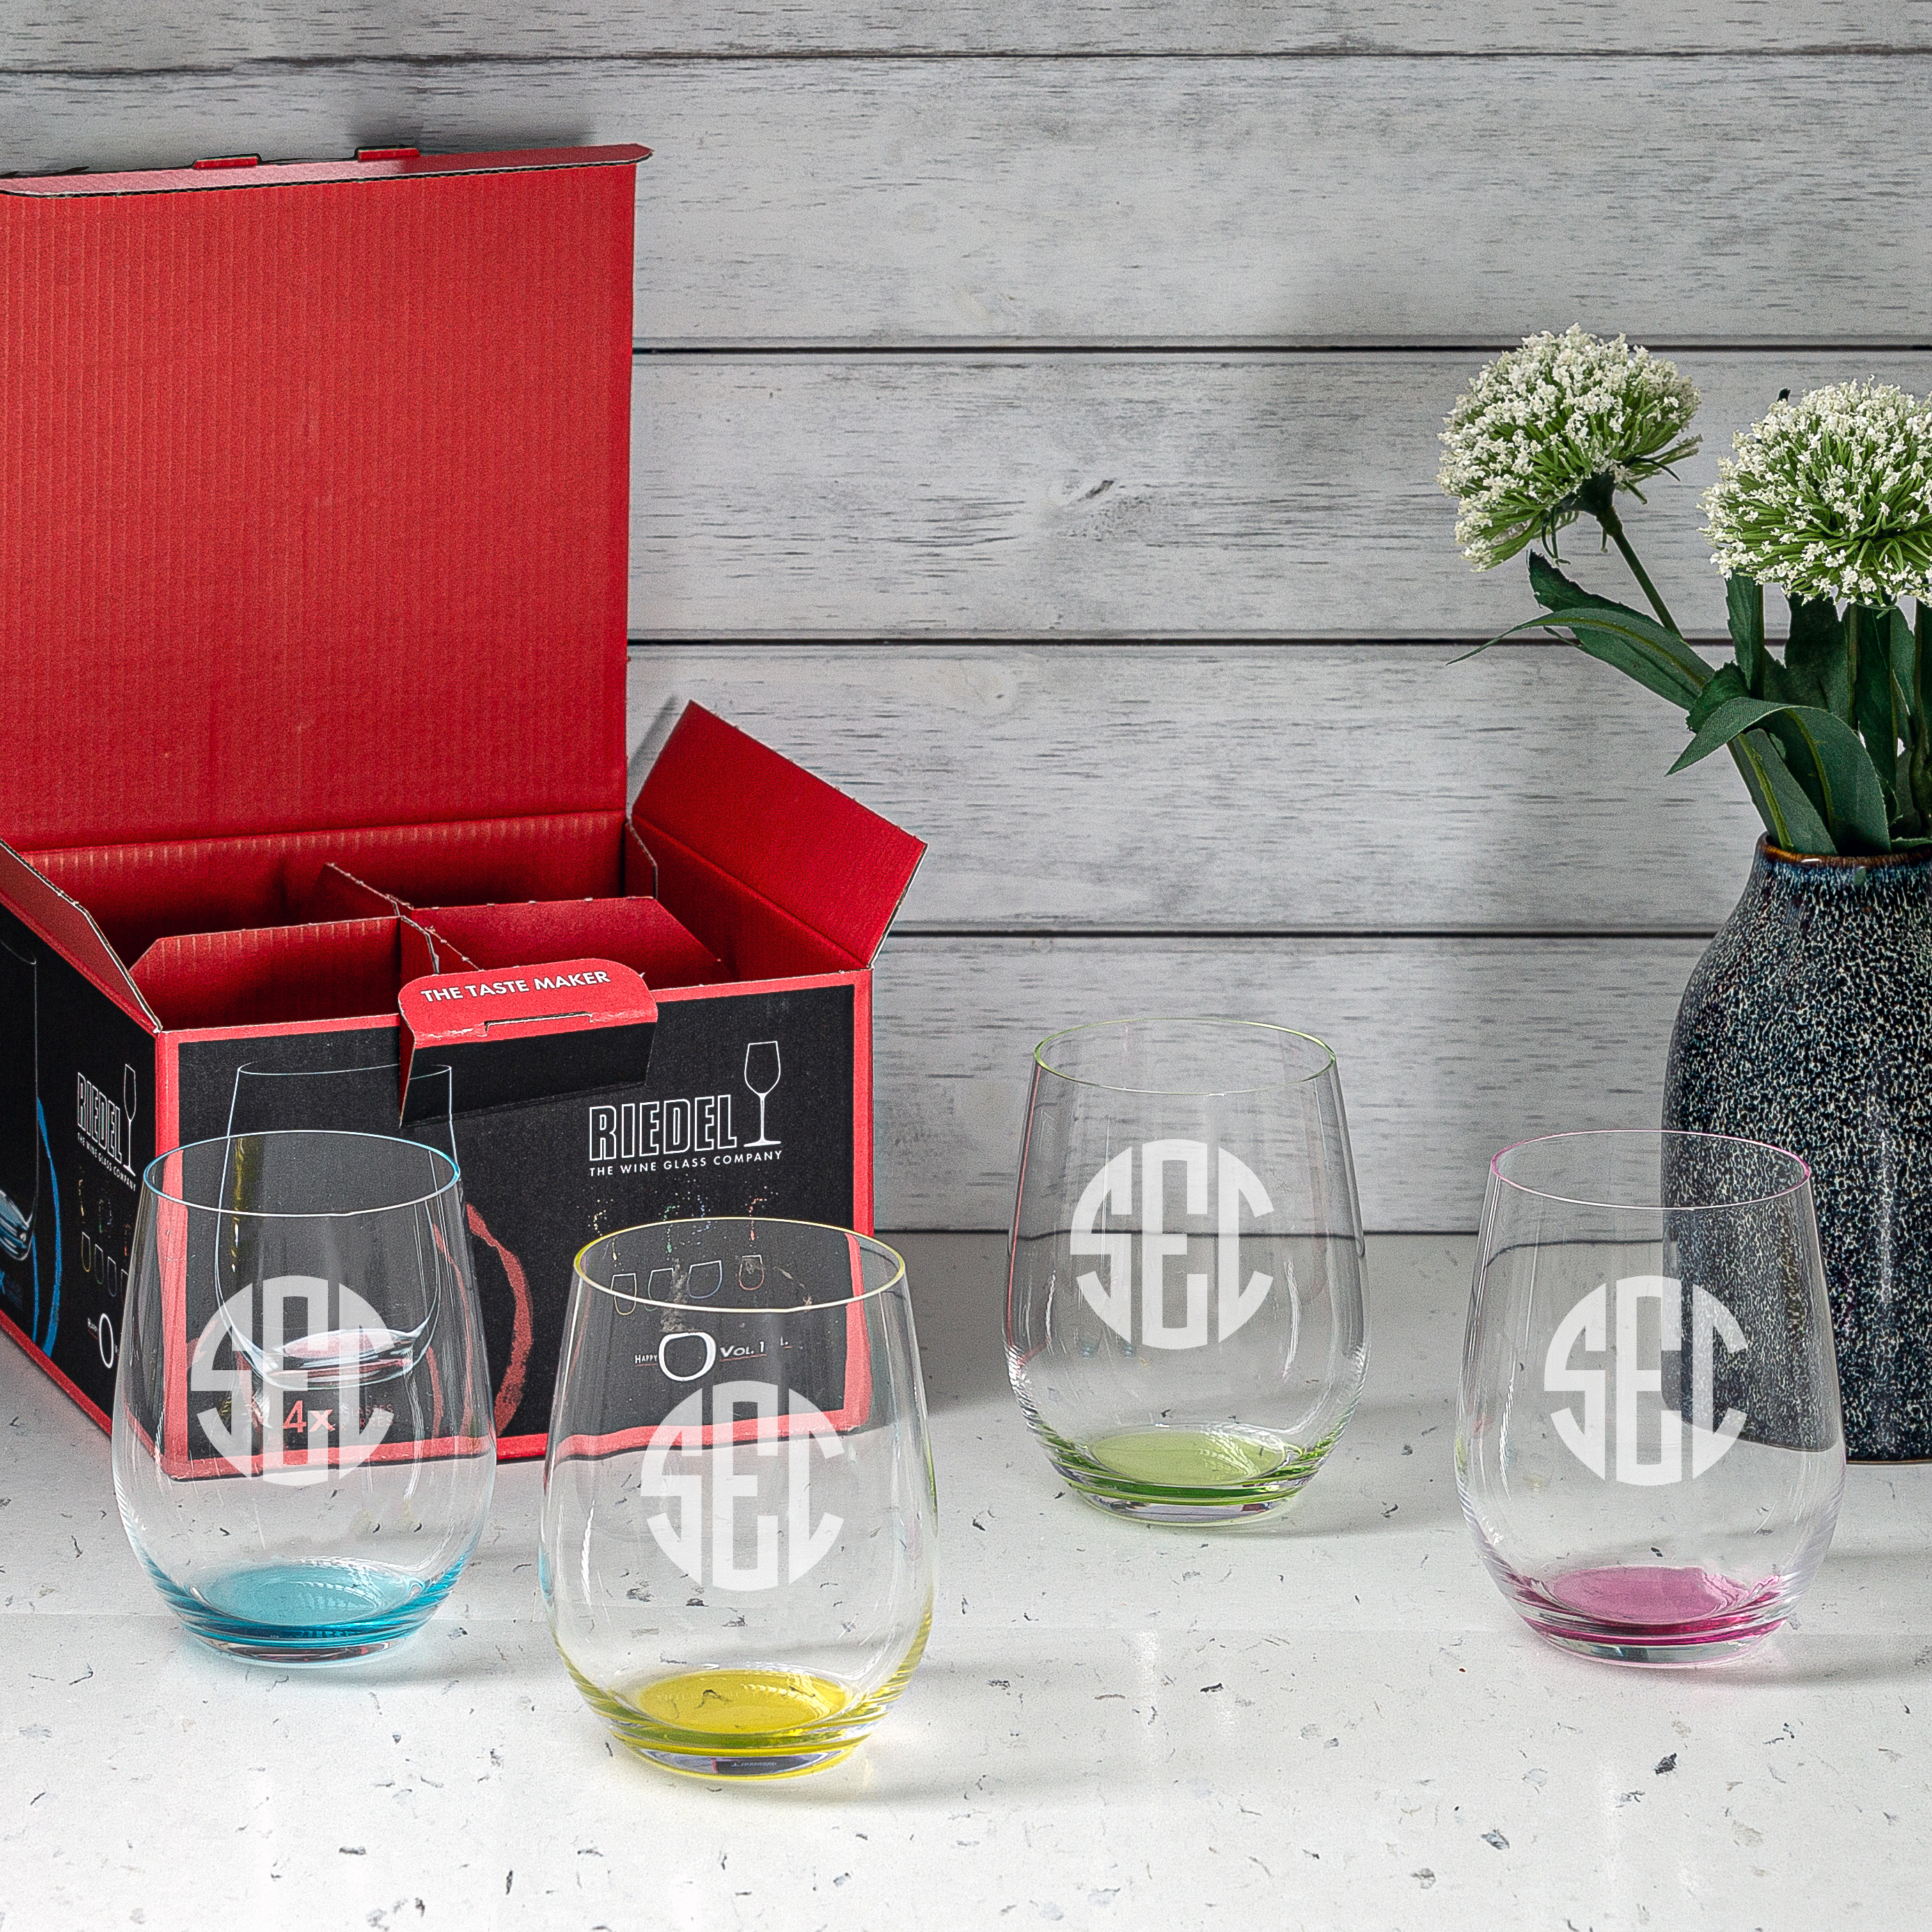 https://cdn11.bigcommerce.com/s-b5w84/images/stencil/original/products/3052/5796/riedel_coloured_stemless__11864.1659394793.jpg?c=2